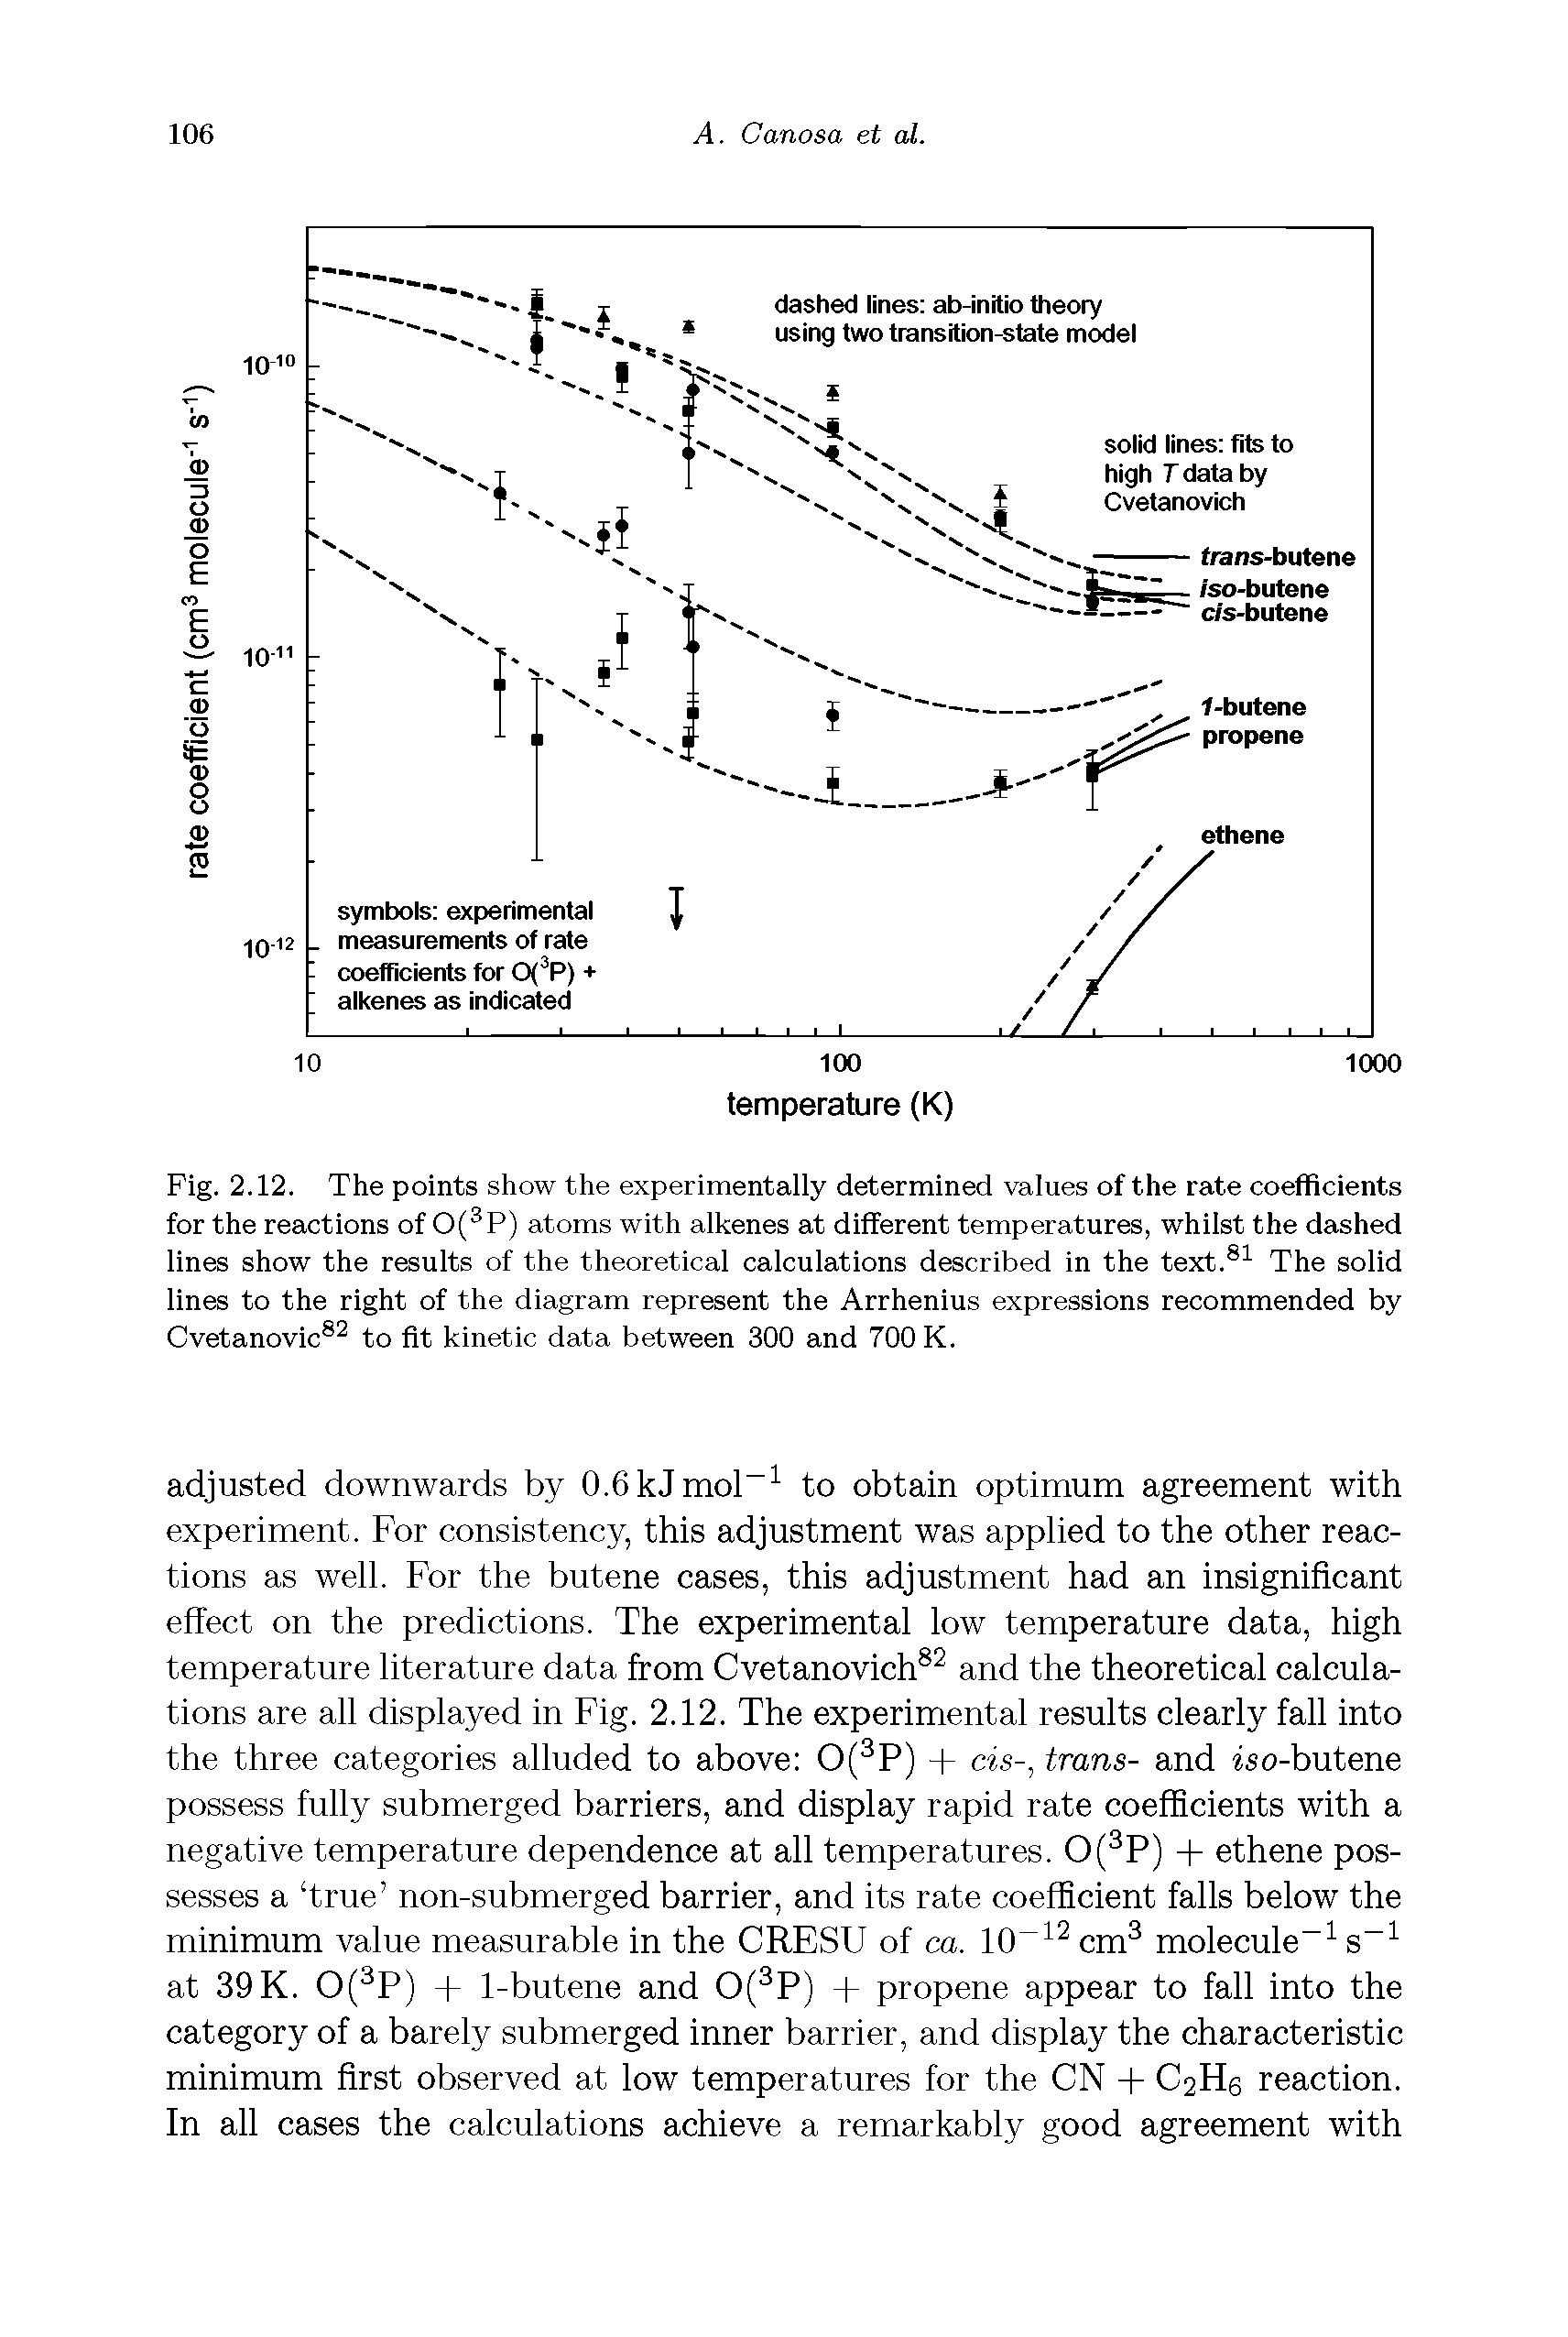 Fig. 2.12. The points show the experimentally determined values of the rate coefficients for the reactions of 0( P) atoms with alkenes at different temperatures, whilst the dashed lines show the results of the theoretical calculations described in the text. The solid lines to the right of the diagram represent the Arrhenius expressions recommended by Cvetanovic to fit kinetic data between 300 and 700 K.